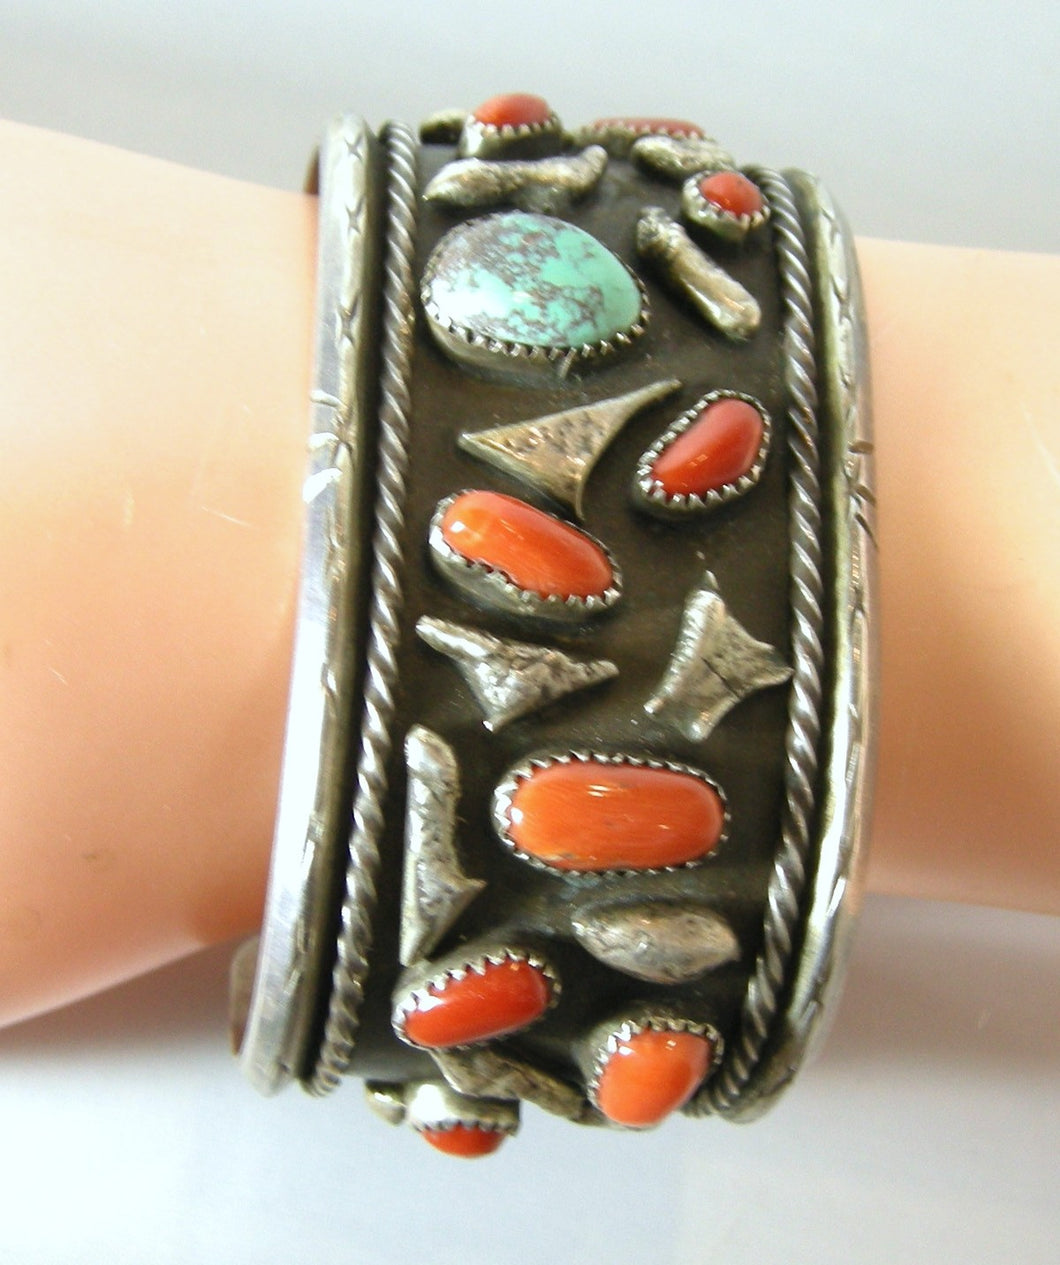 Vintage Sterling Zuni Coral And Turquoise Nugget Cuff